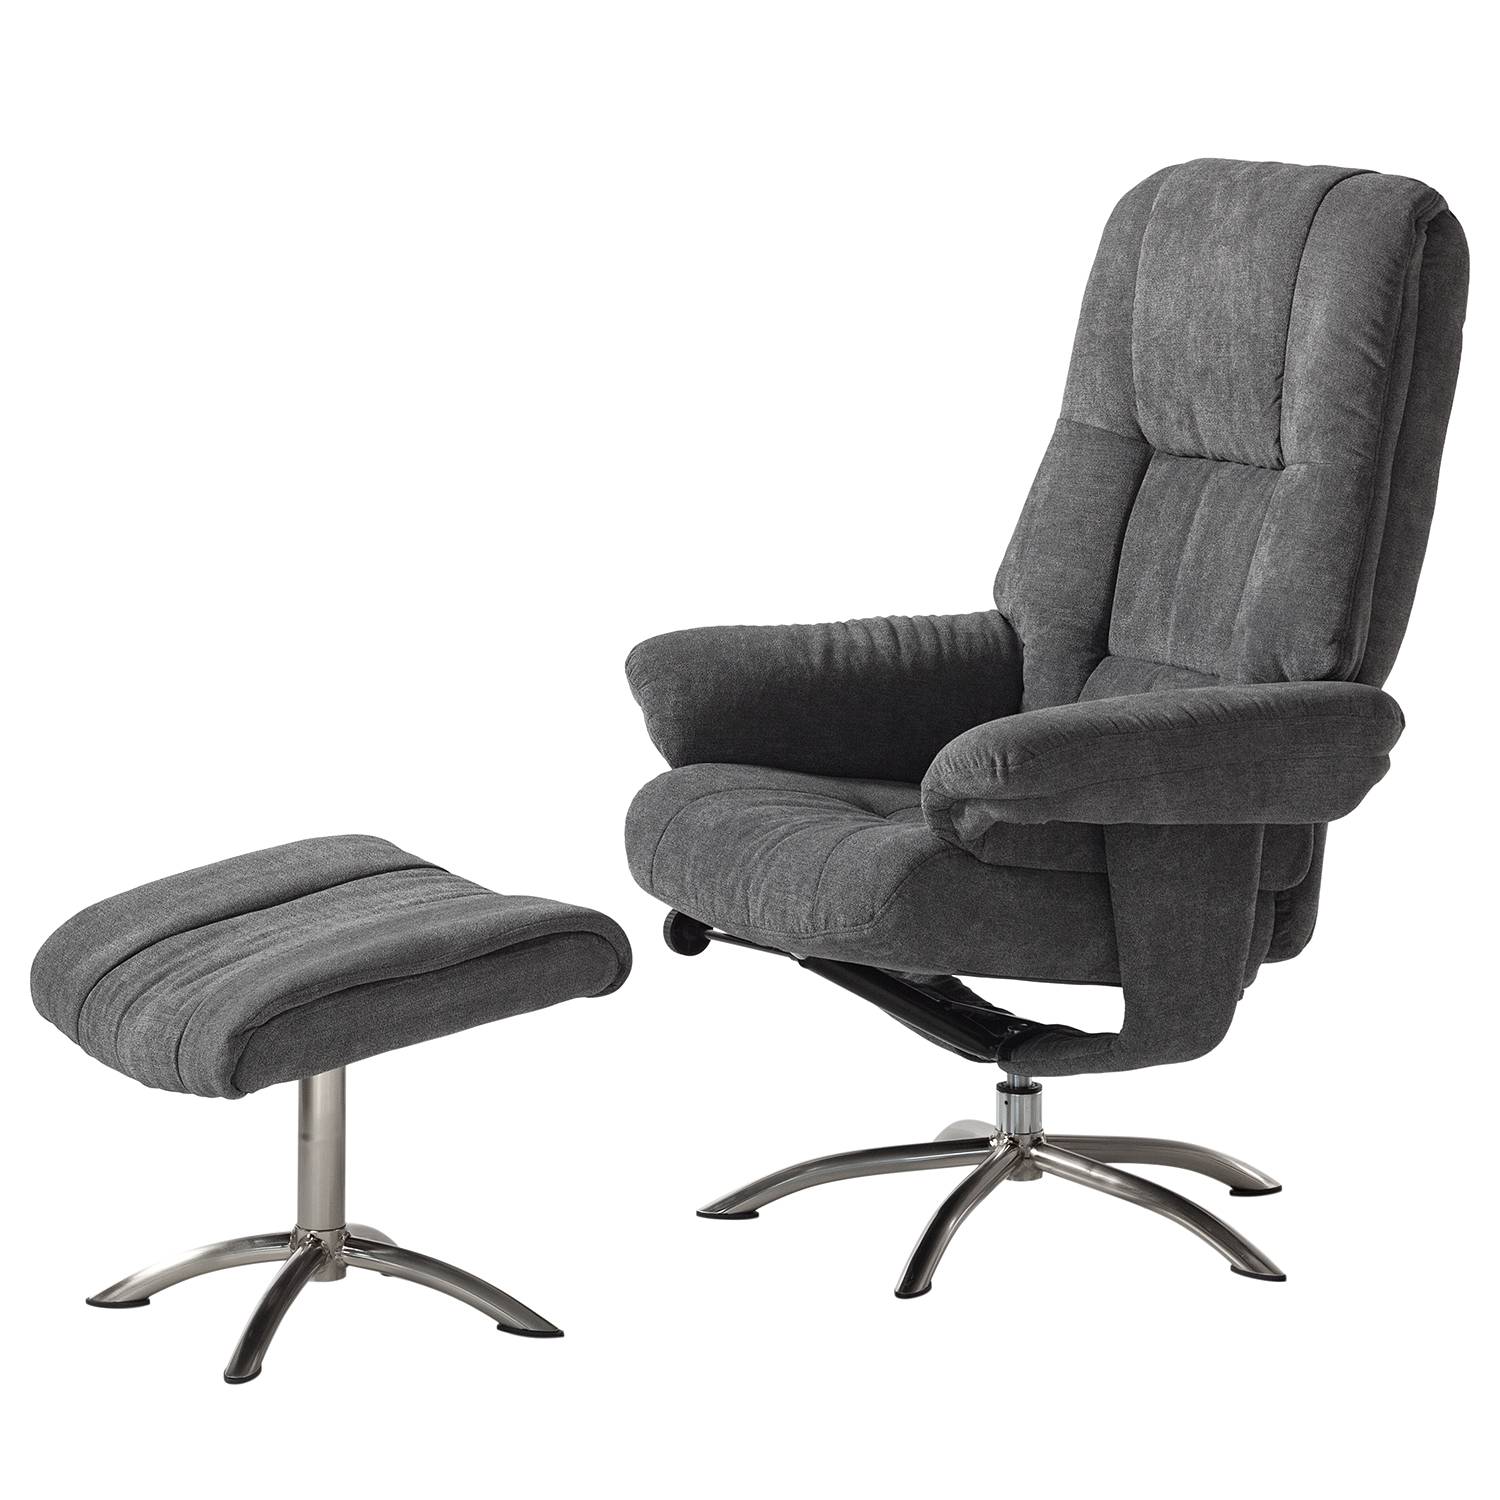 Relaxfauteuil Para I | home24